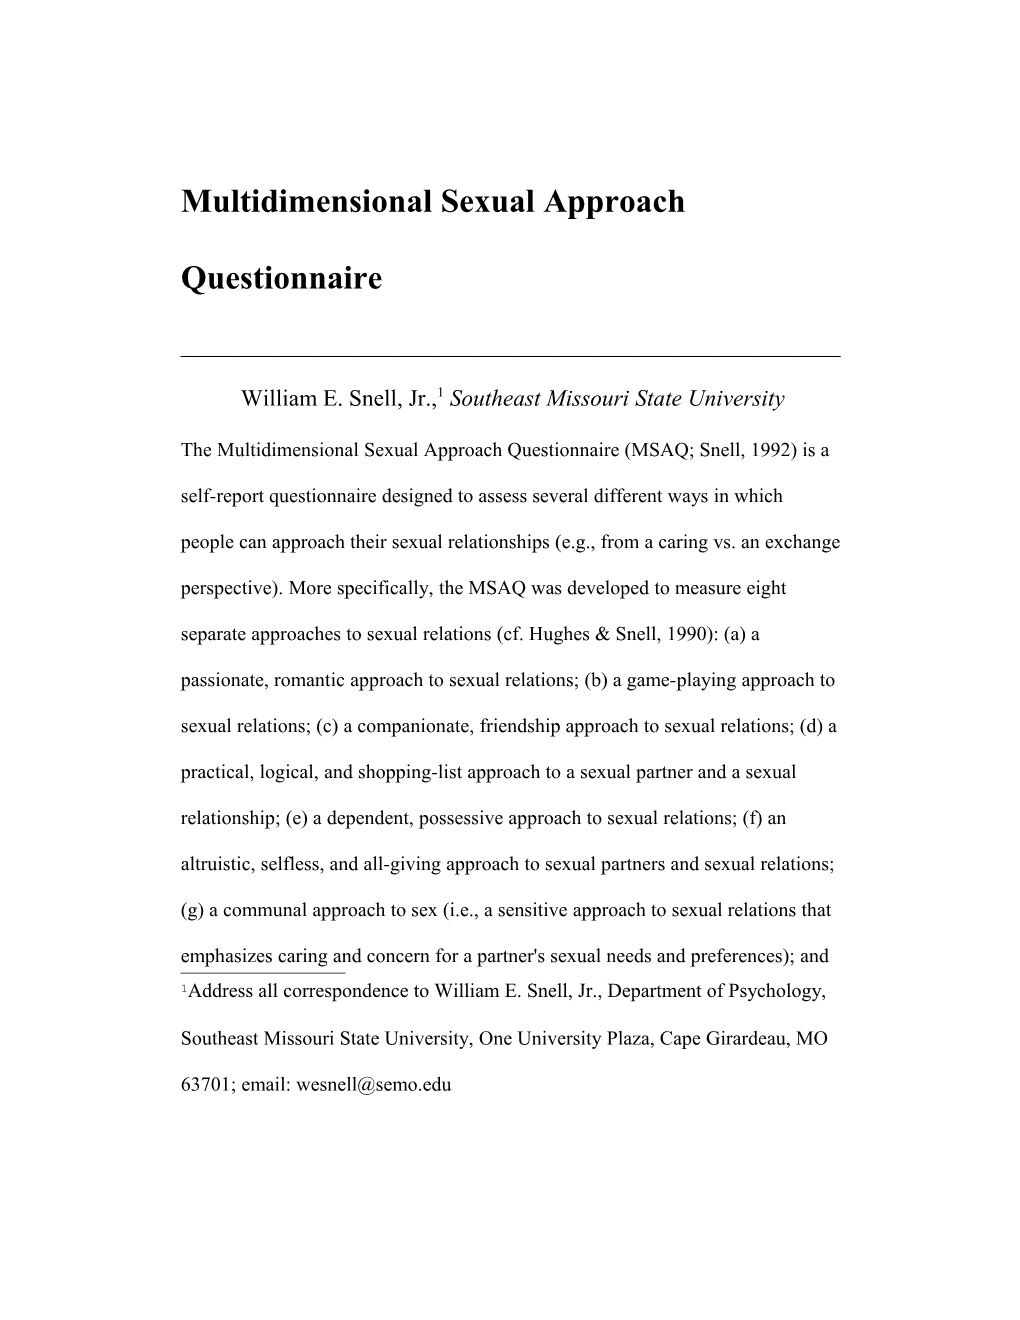 Multidimensional Sexual Approach Questionnaire